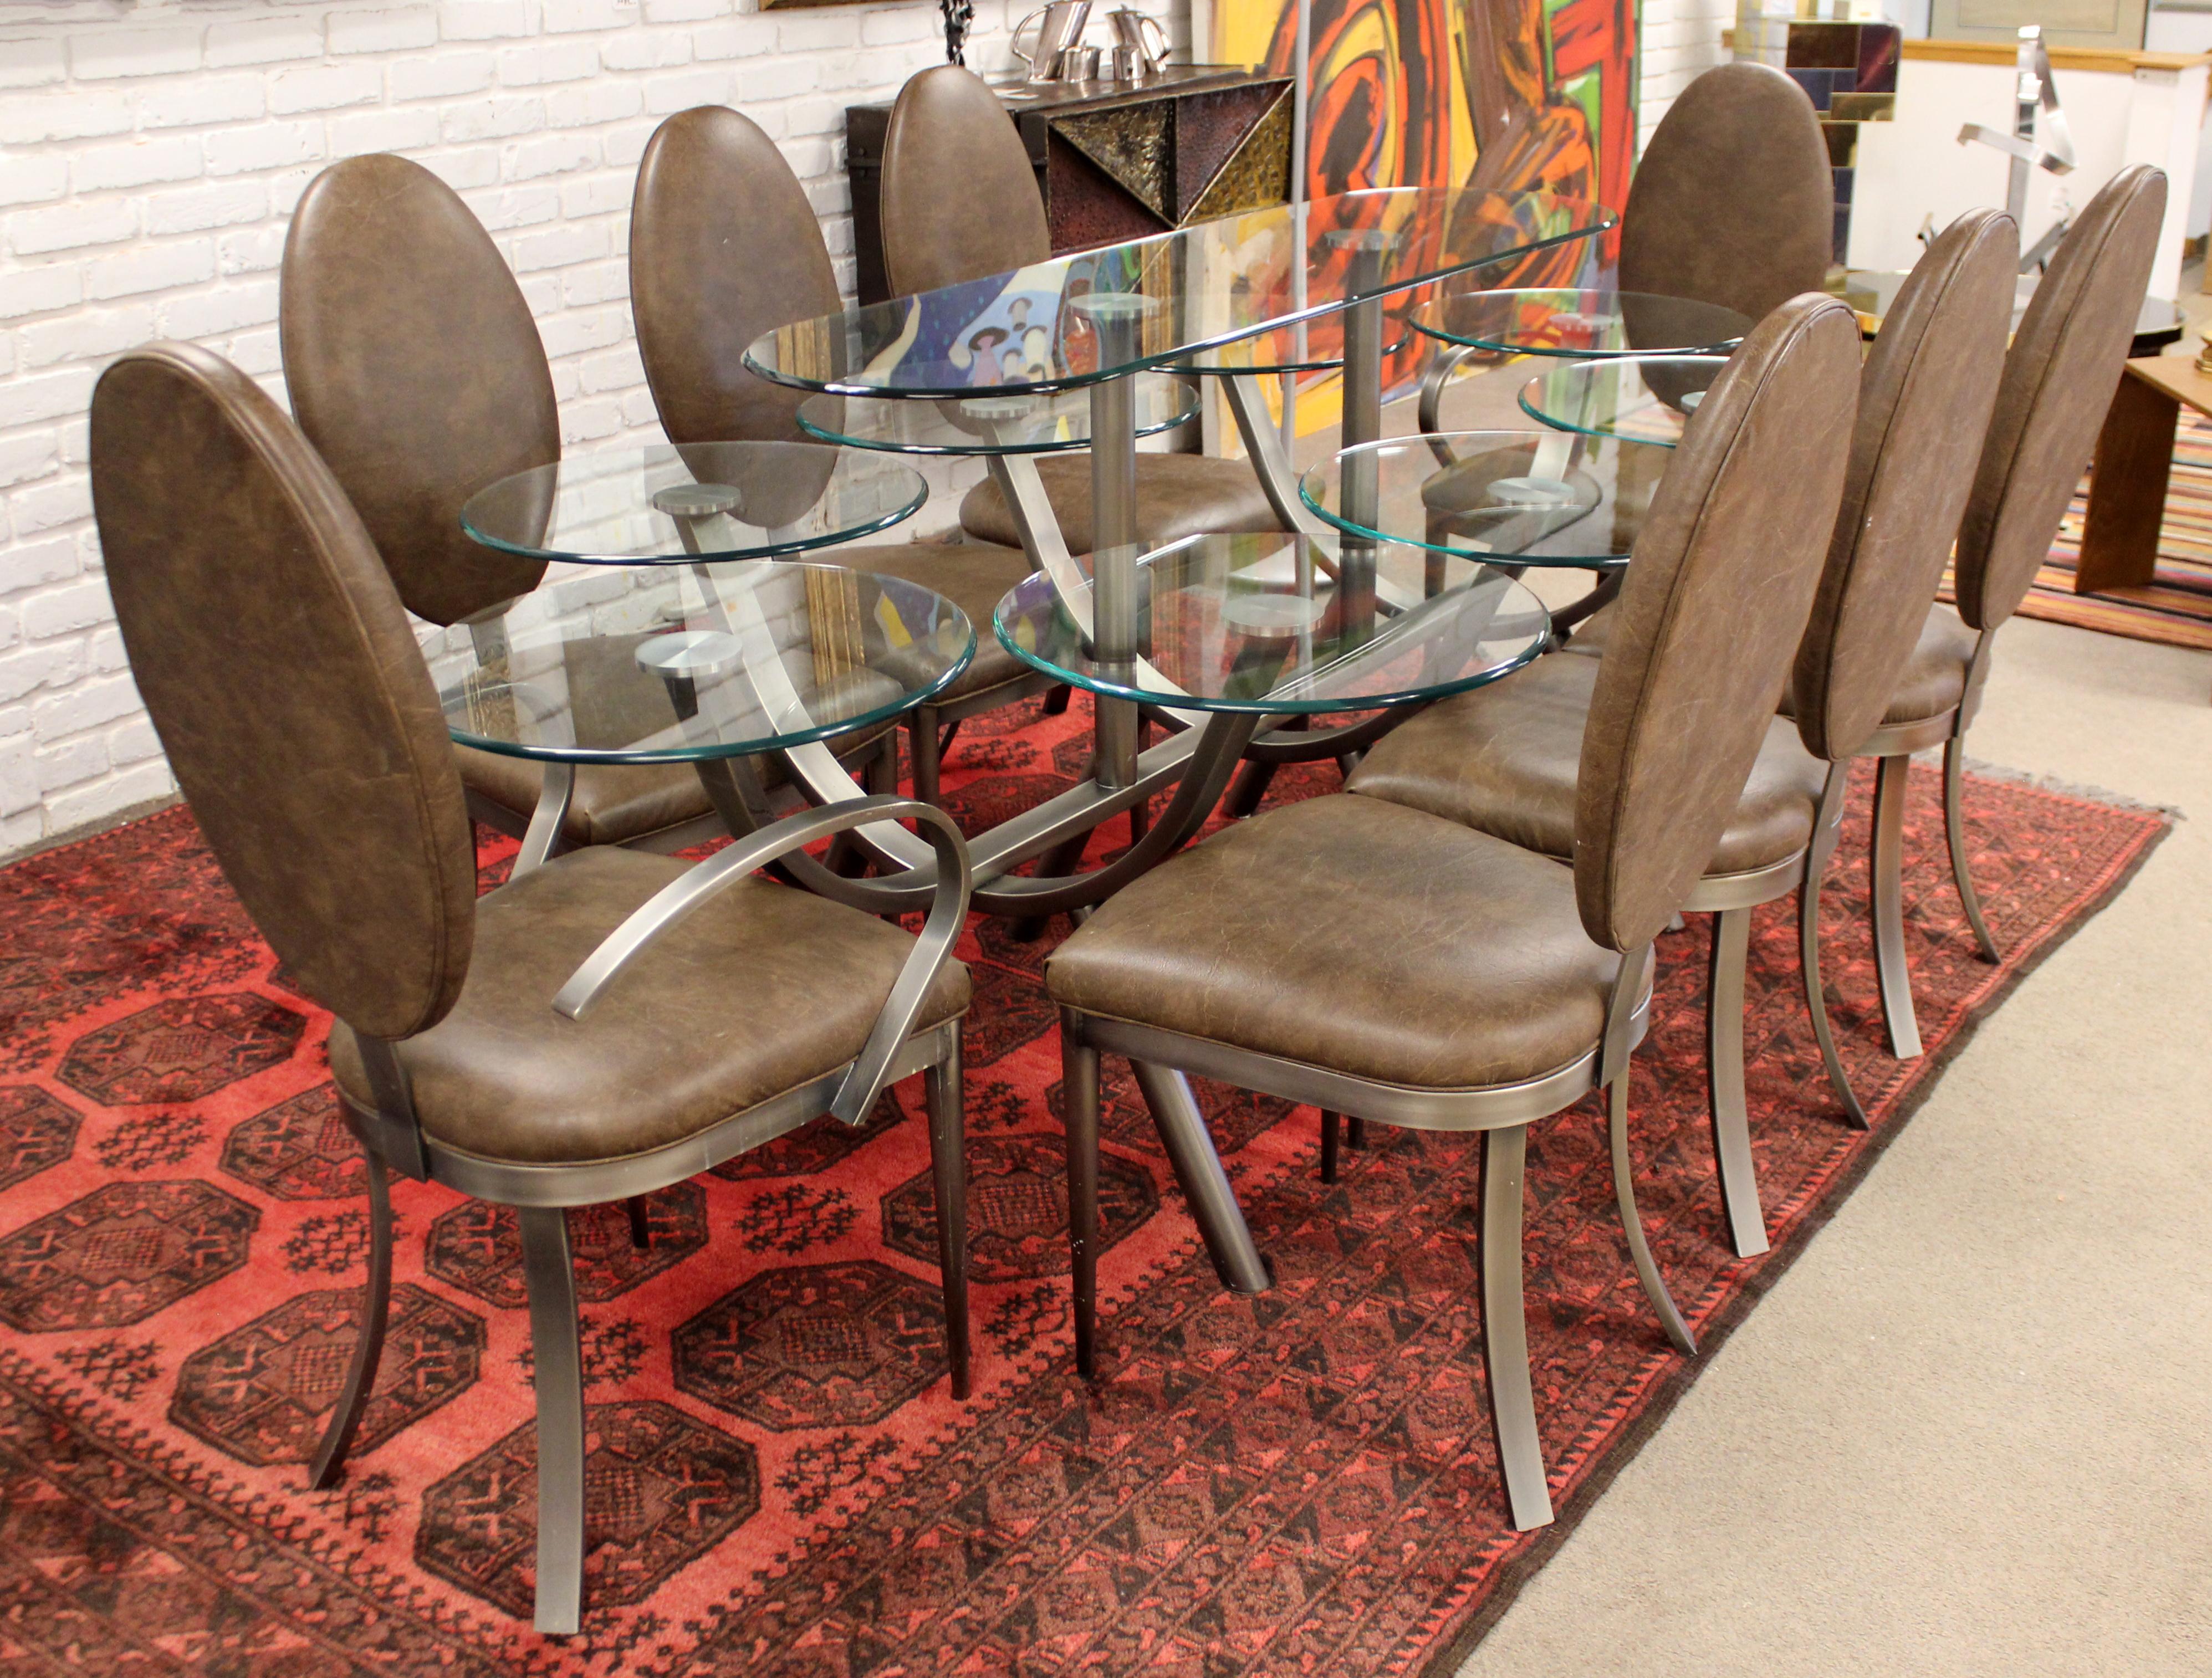 American Contemporary Modern DIA Circle of Life Dining Set Table Chairs 1980s Glass Steel